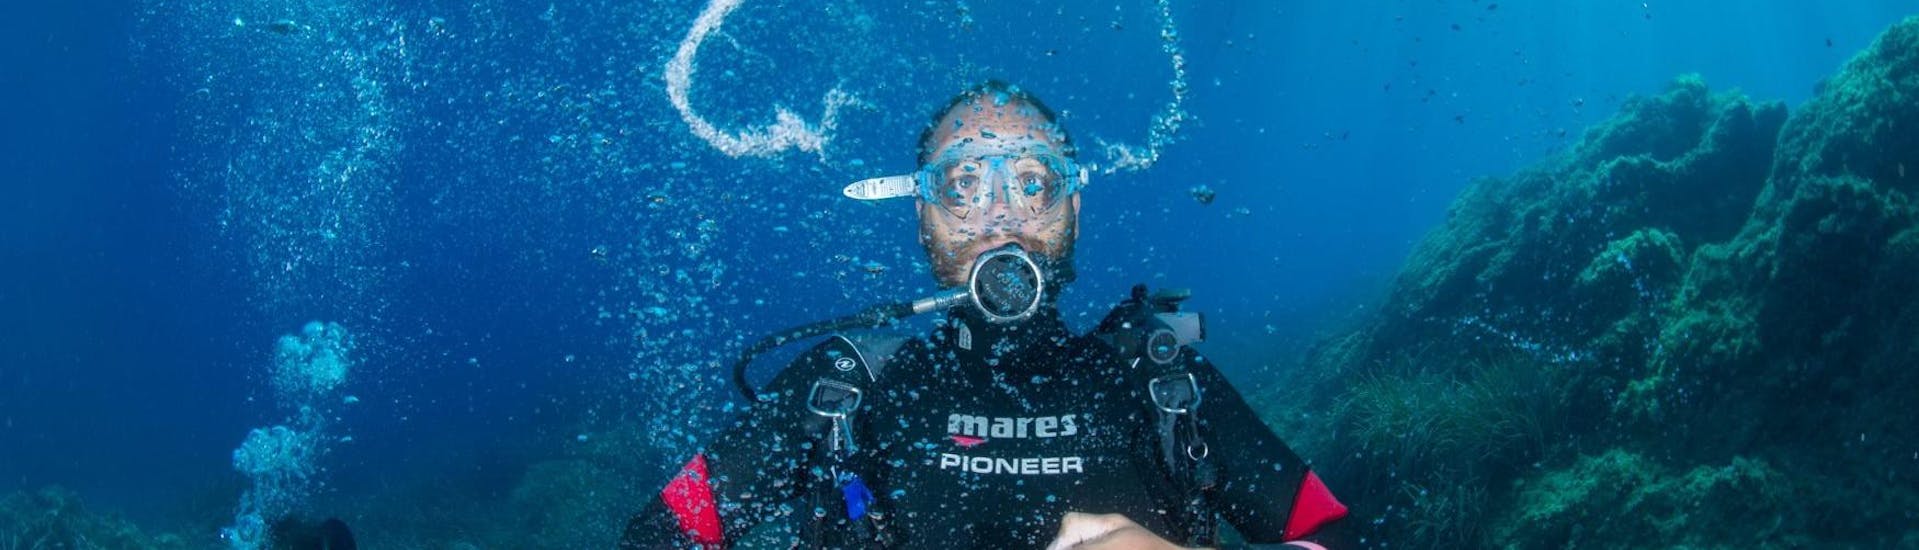 Diver making bubbles in the water during his SSI Basic Diver Course in Sainte-Maxime for Beginners with H2O Sainte-Maxime.